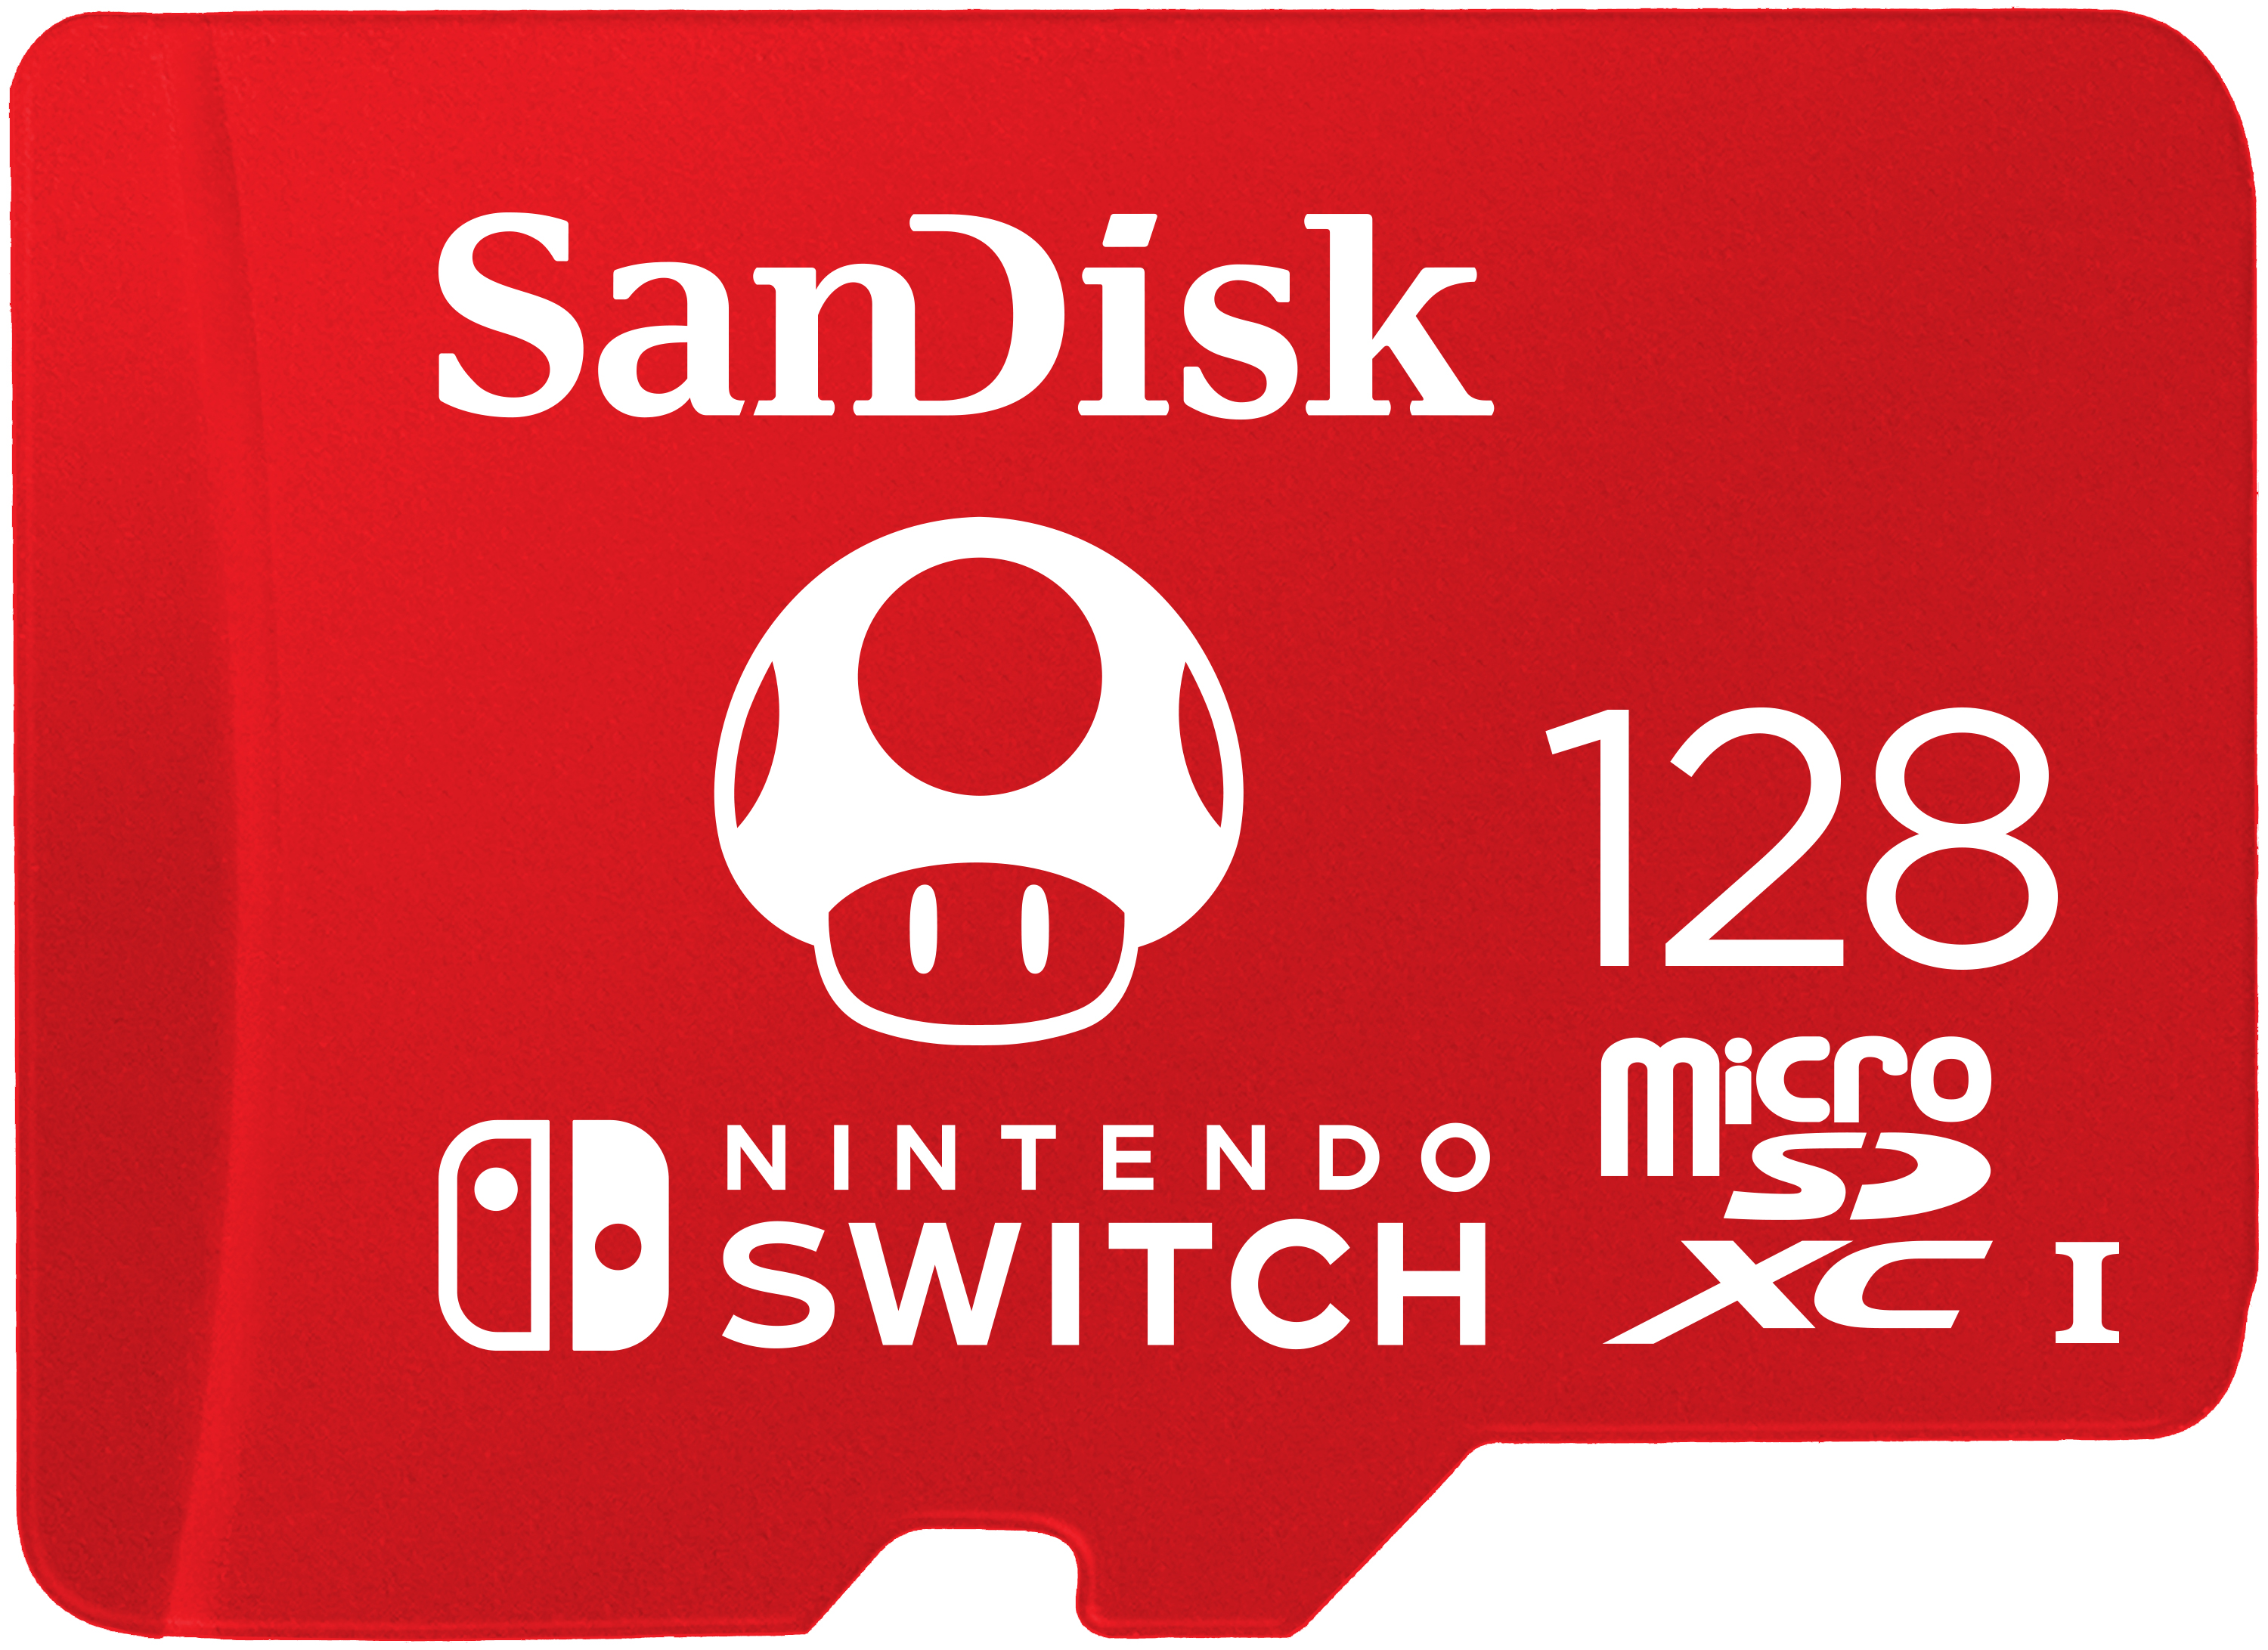 SanDisk 128GB microSDXC UHS-I Memory Card Licensed for Nintendo Switch, Red - 100MB/s, Micro SD Card - SDSQXBO-128G-AWCZA - image 1 of 7